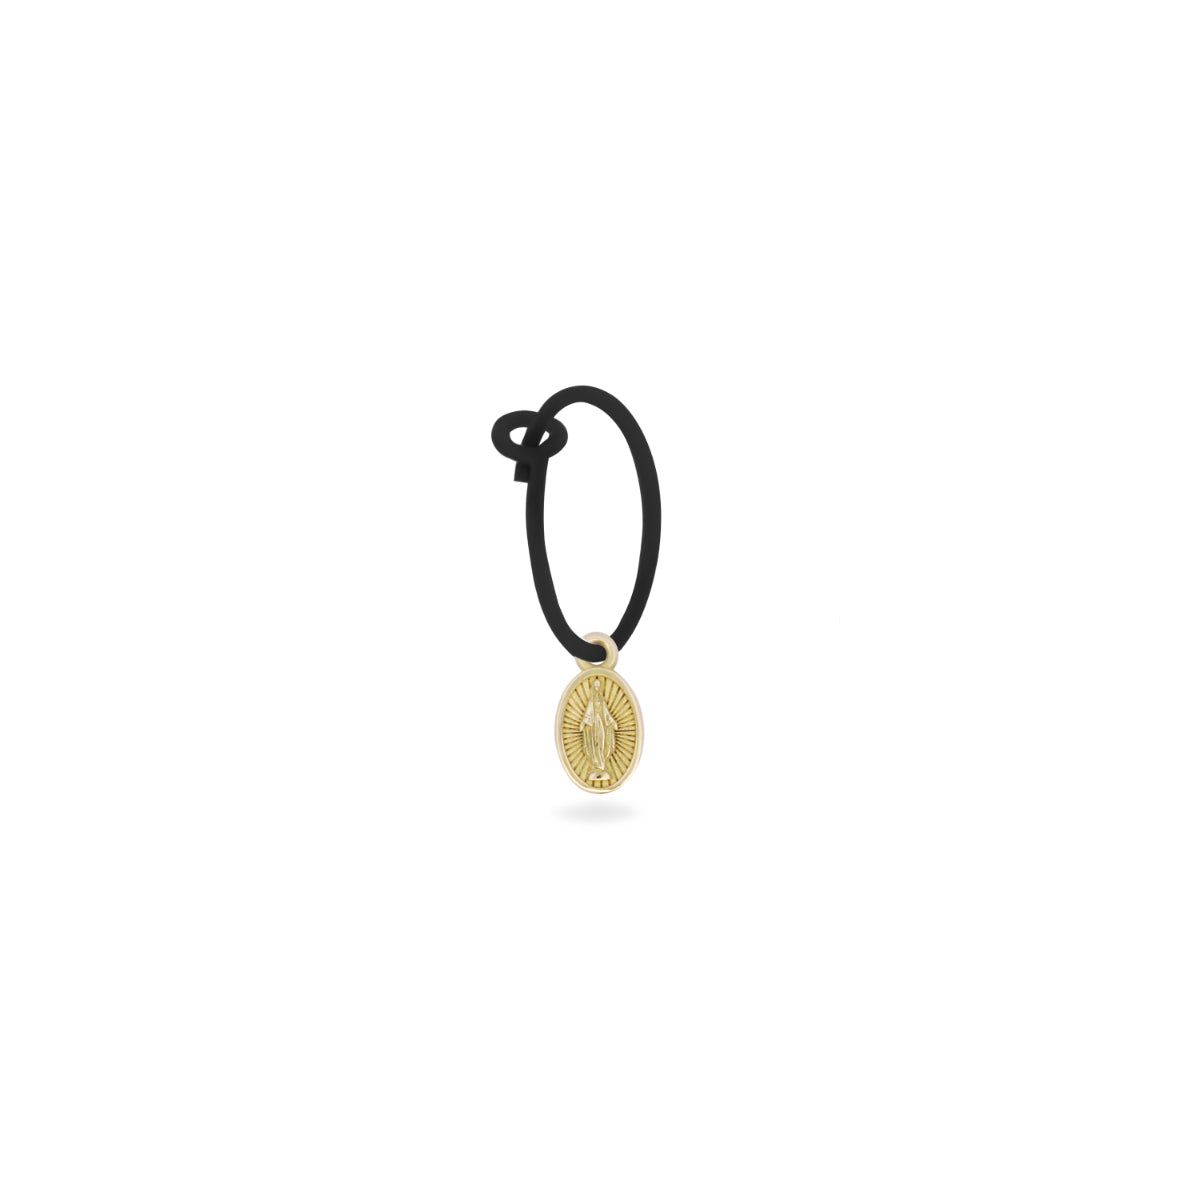 Earrings - Single earring with Madonna and painted hoop - ORO18KT - 1 | Rue des Mille